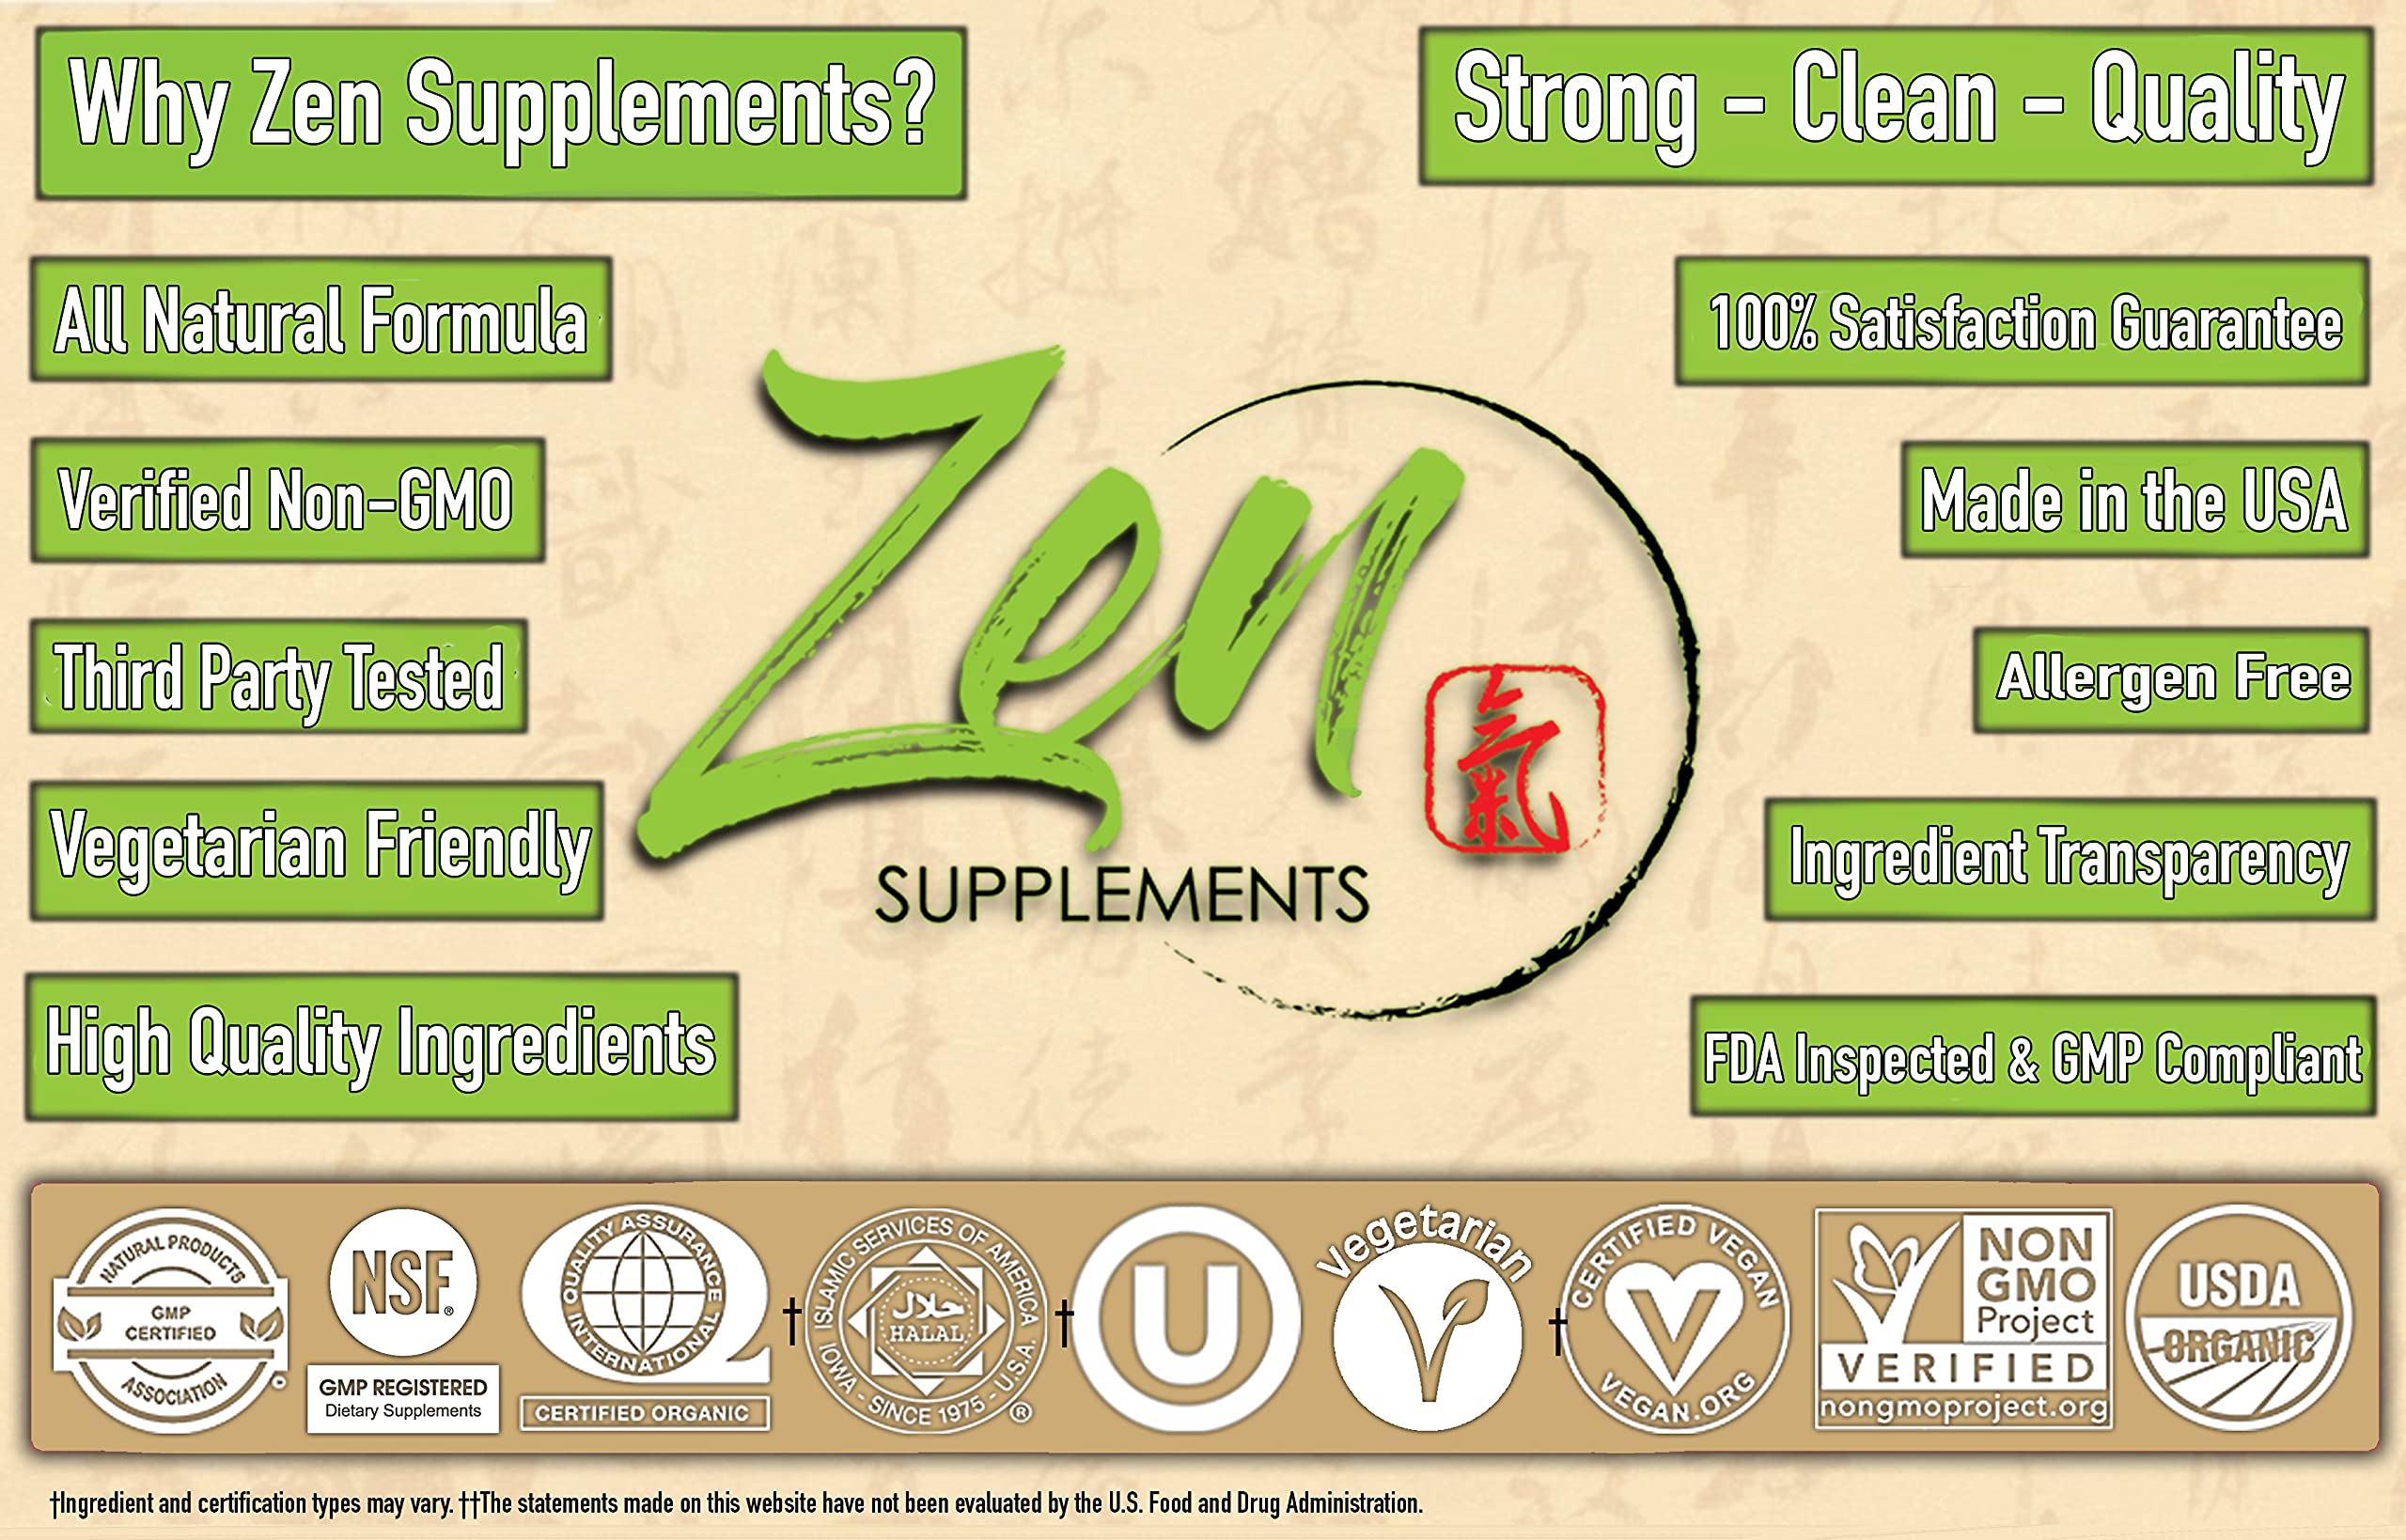 Zen Supplements - Vitamin E-400IU Mixed Tocopherols - Supports Overall Wellness & Immune Function, Promotes Beautiful Hair & Skin 250-Softgel